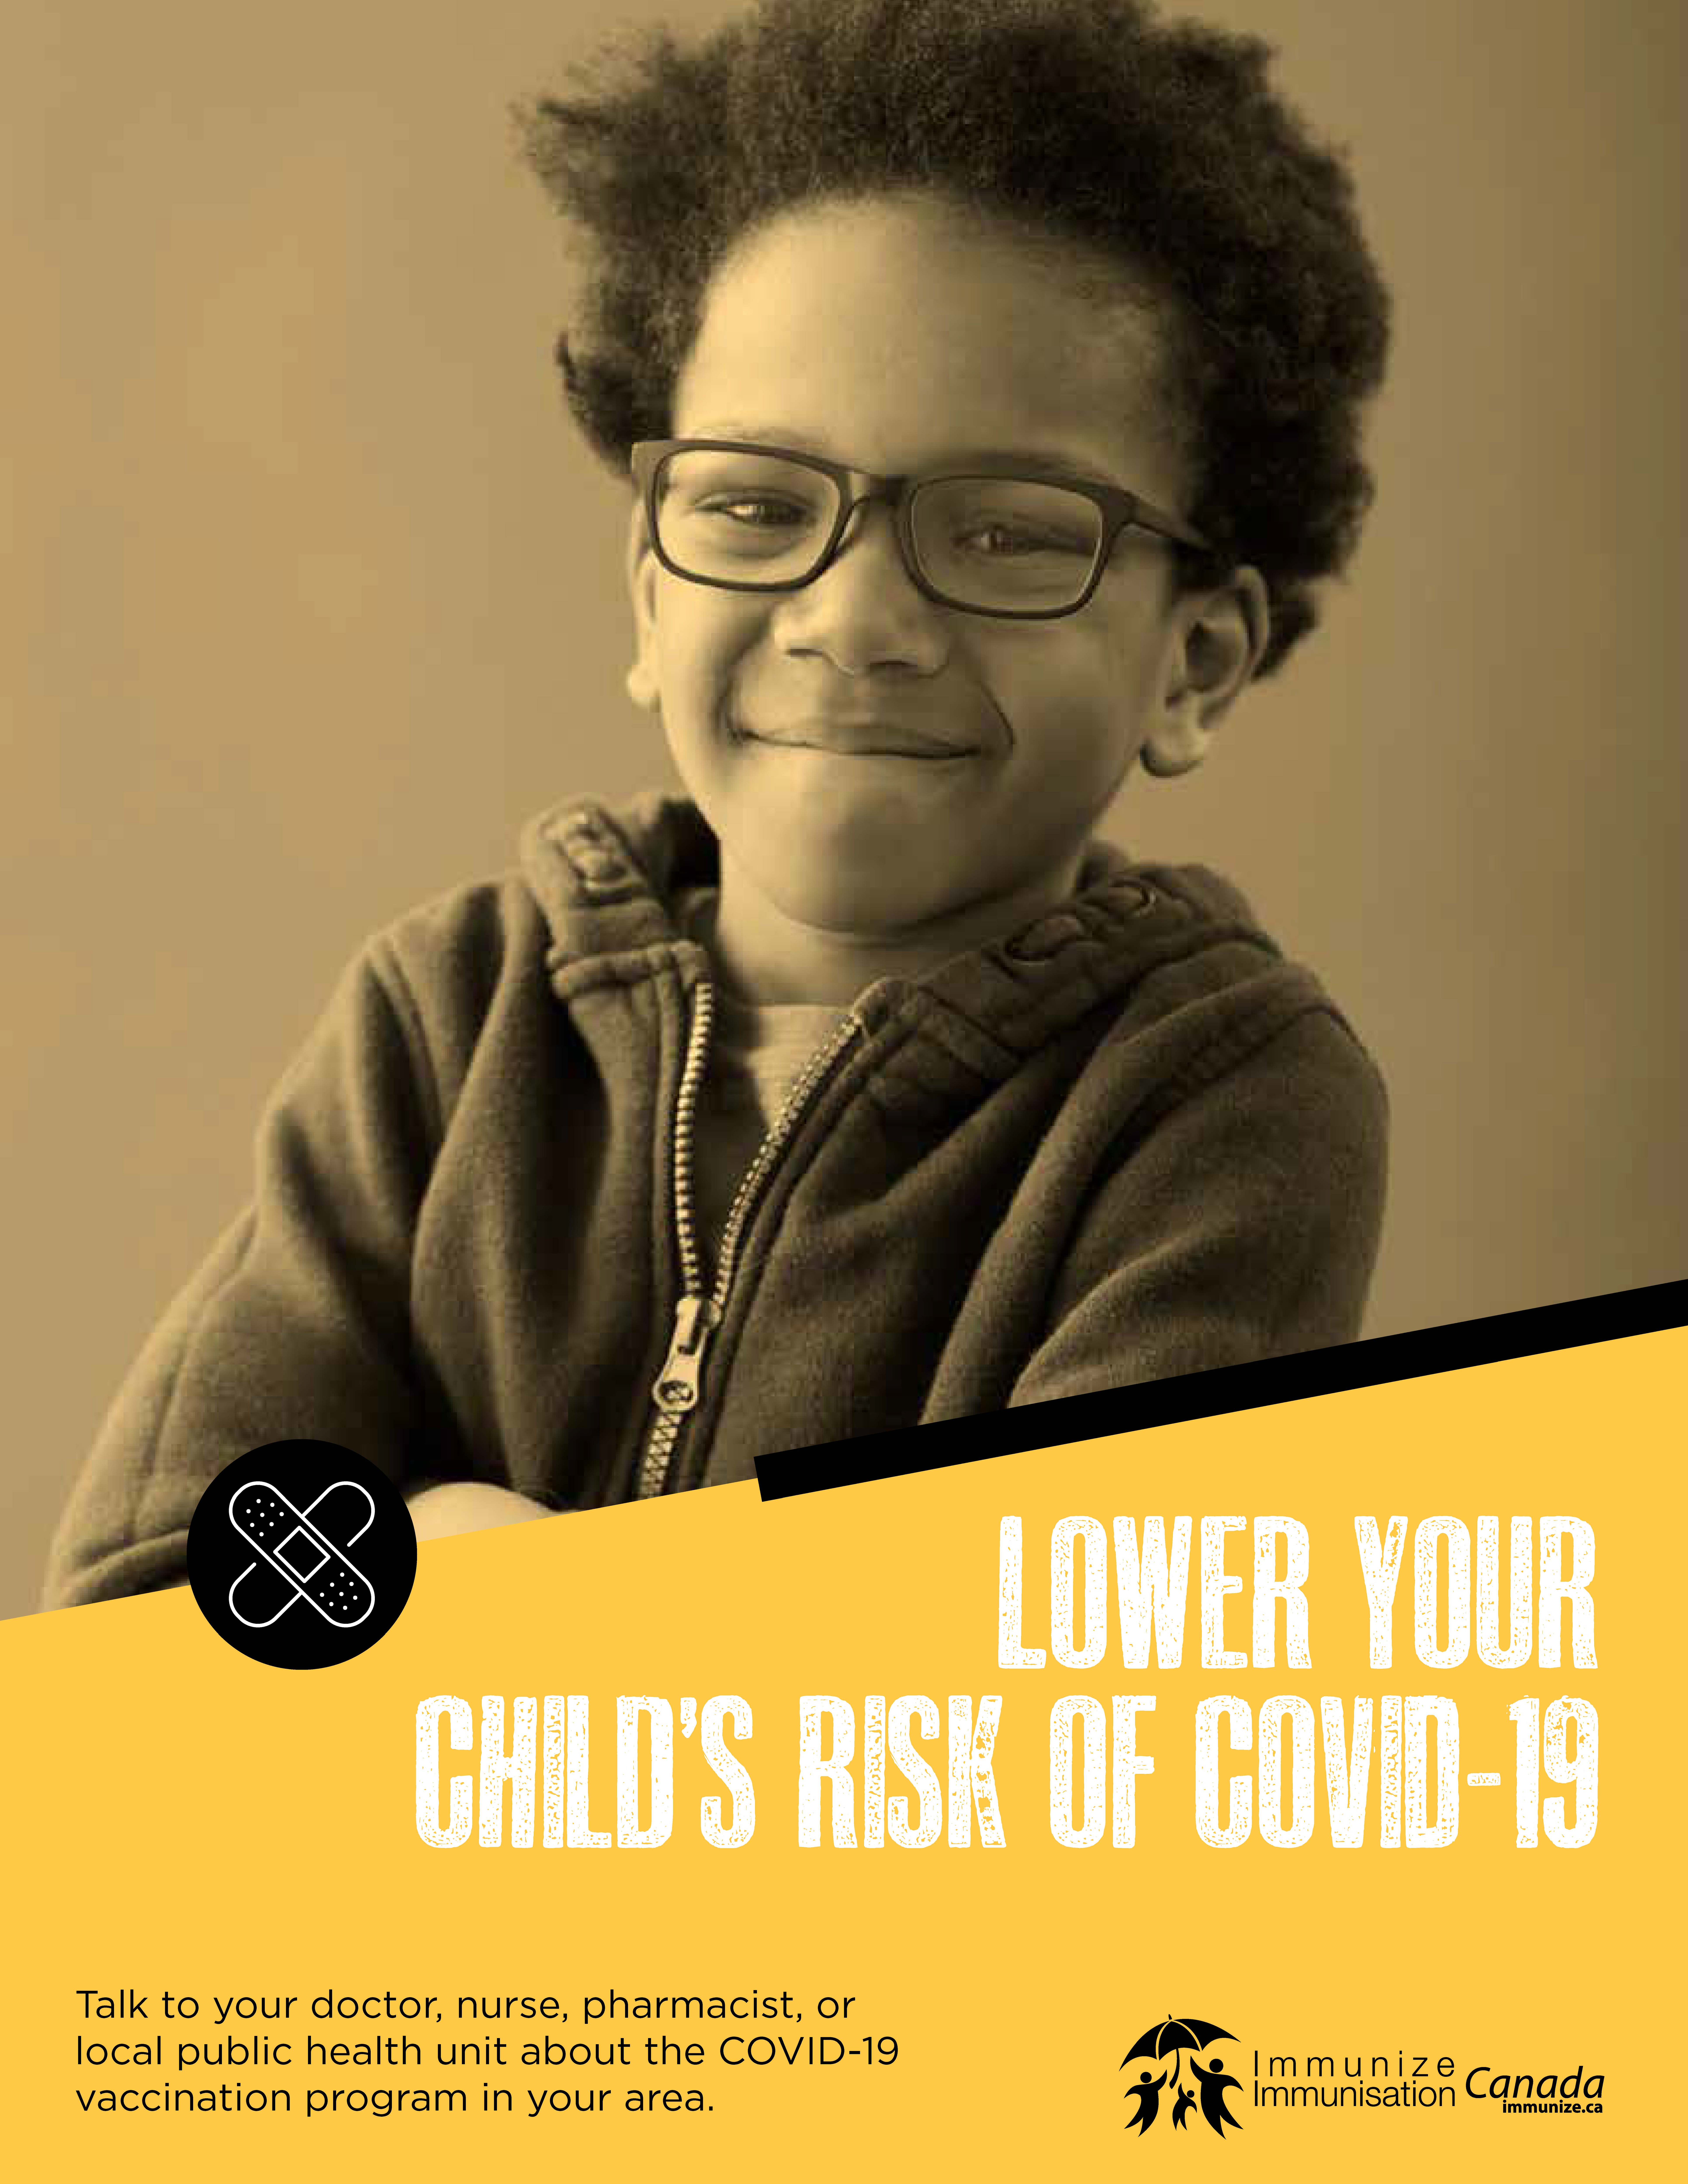 Lower your child's risk of COVID-19.